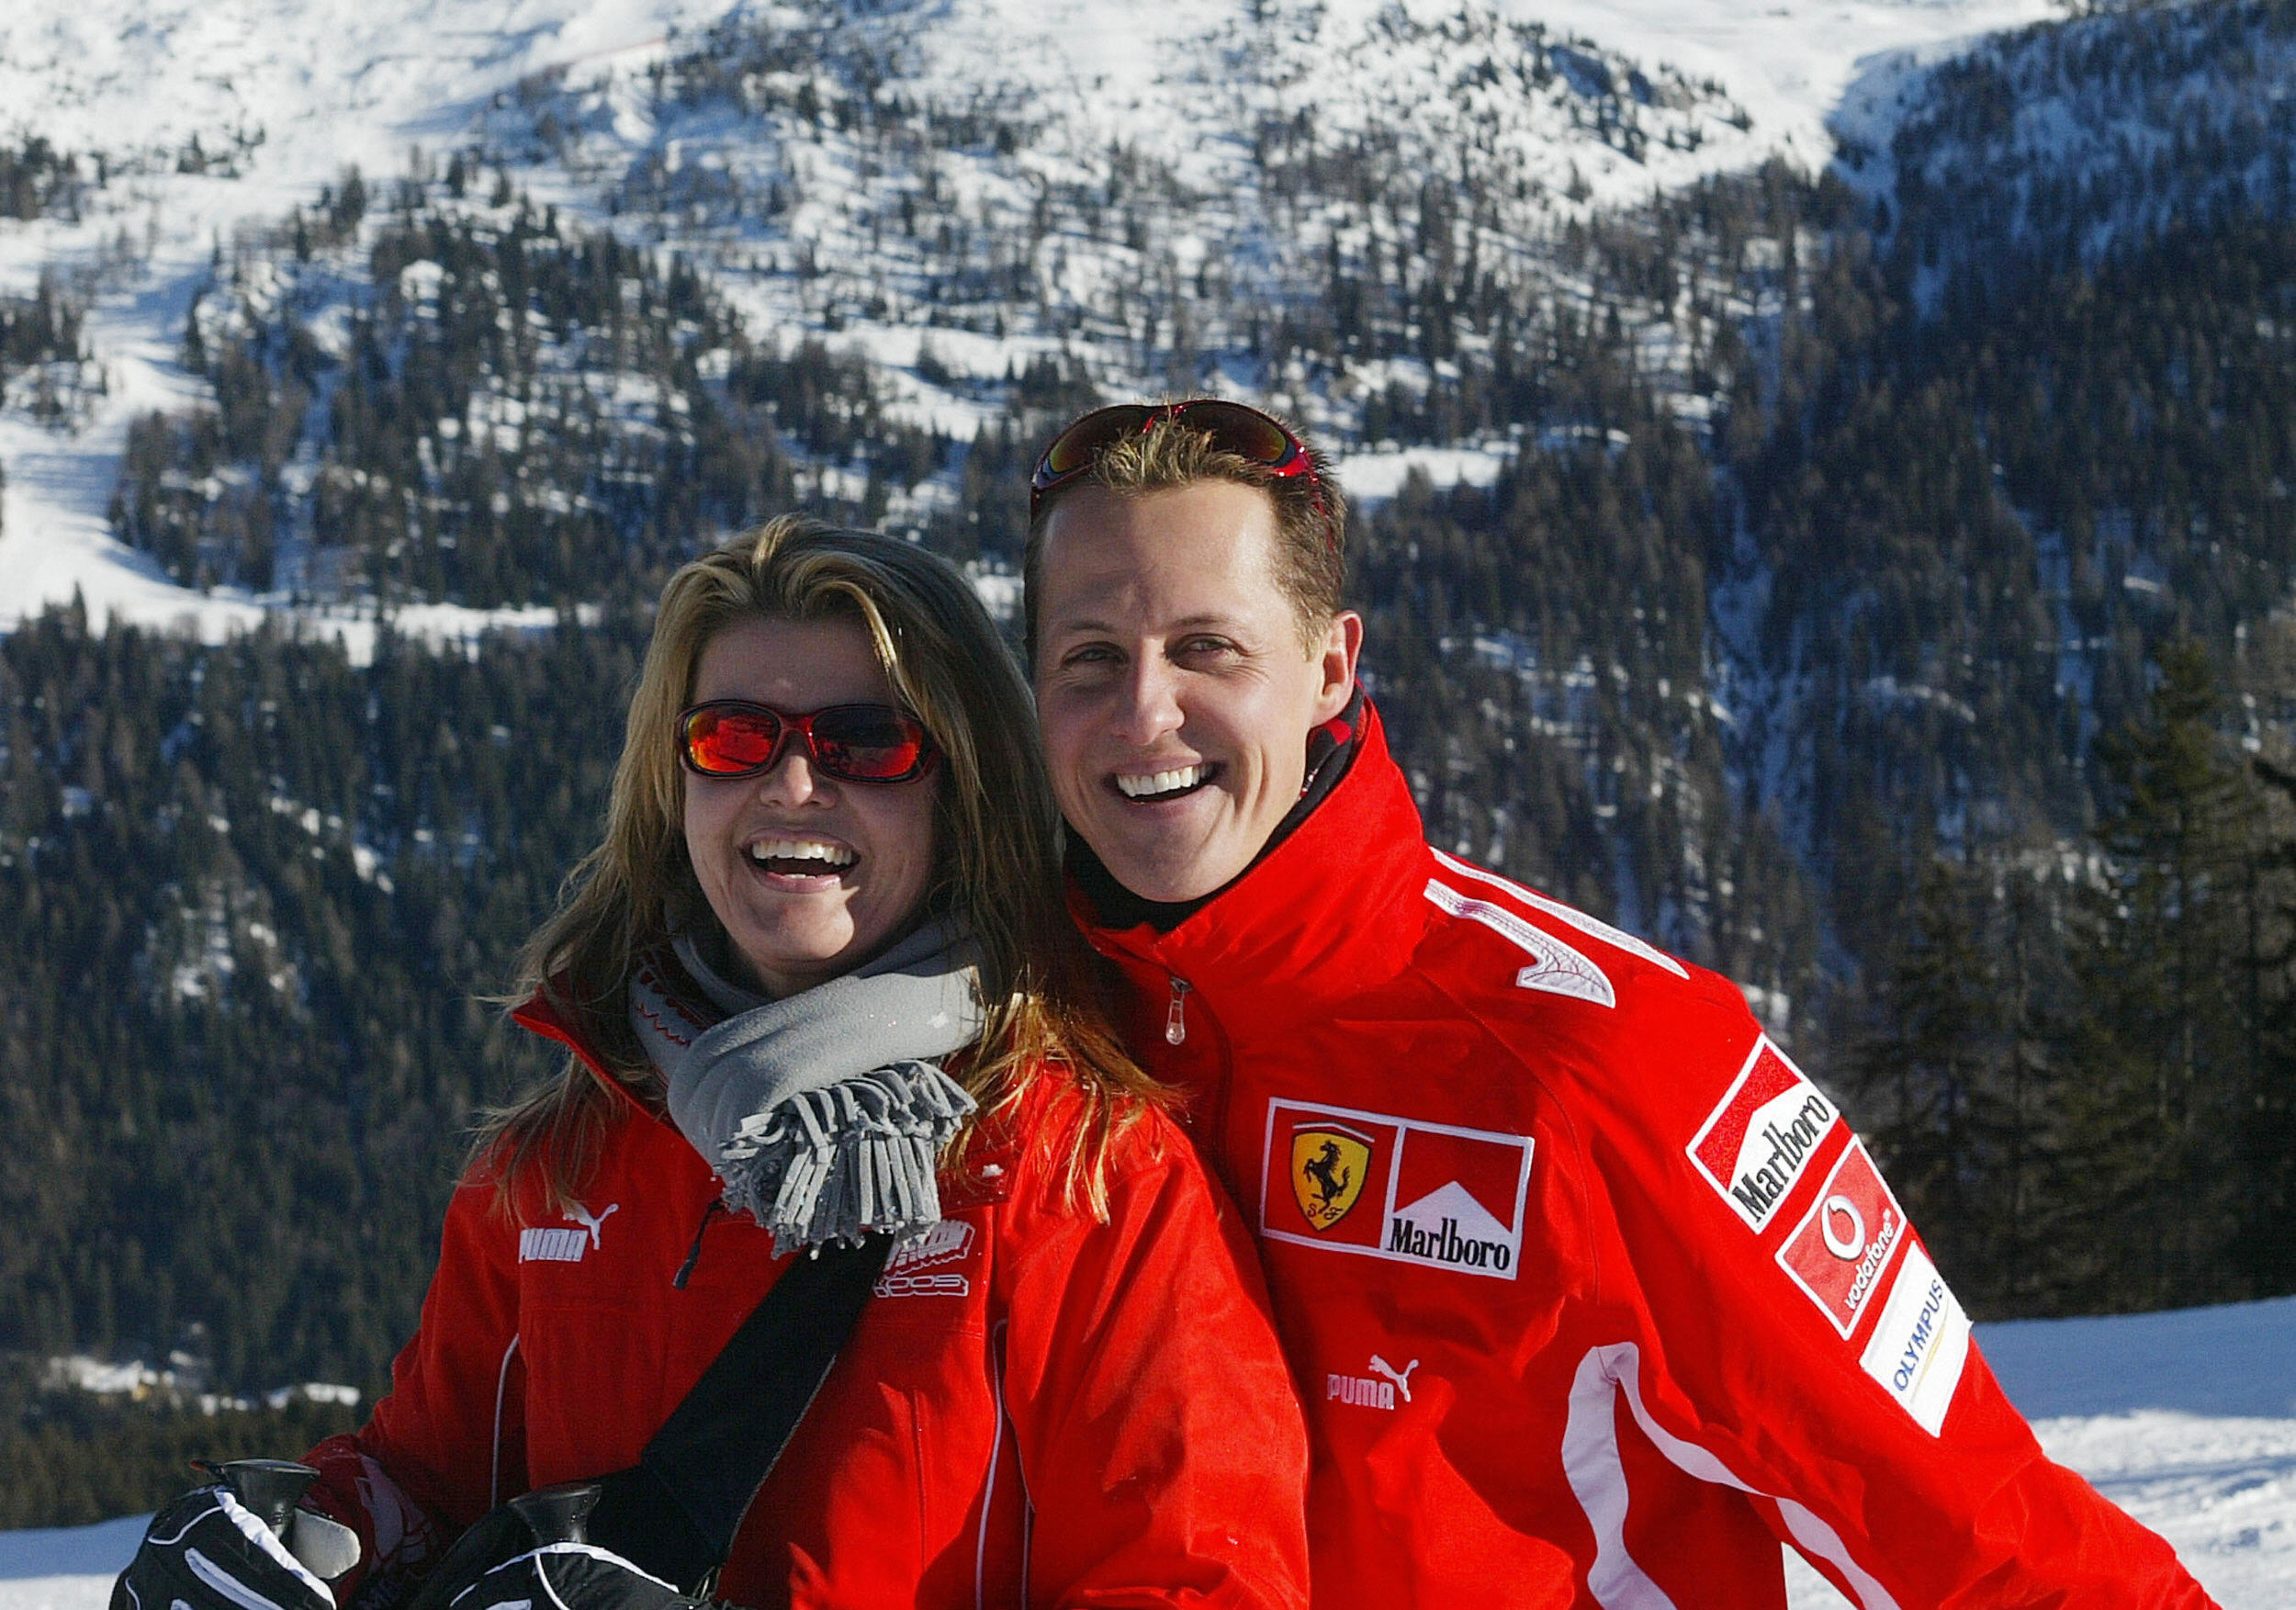 Michael Schumacher poses with his wife Corinna Schumacher, in the winter resort of Madonna di Campiglio, in the Dolomites area, Northern Italy, January 11, 2005. | Source: Getty Images